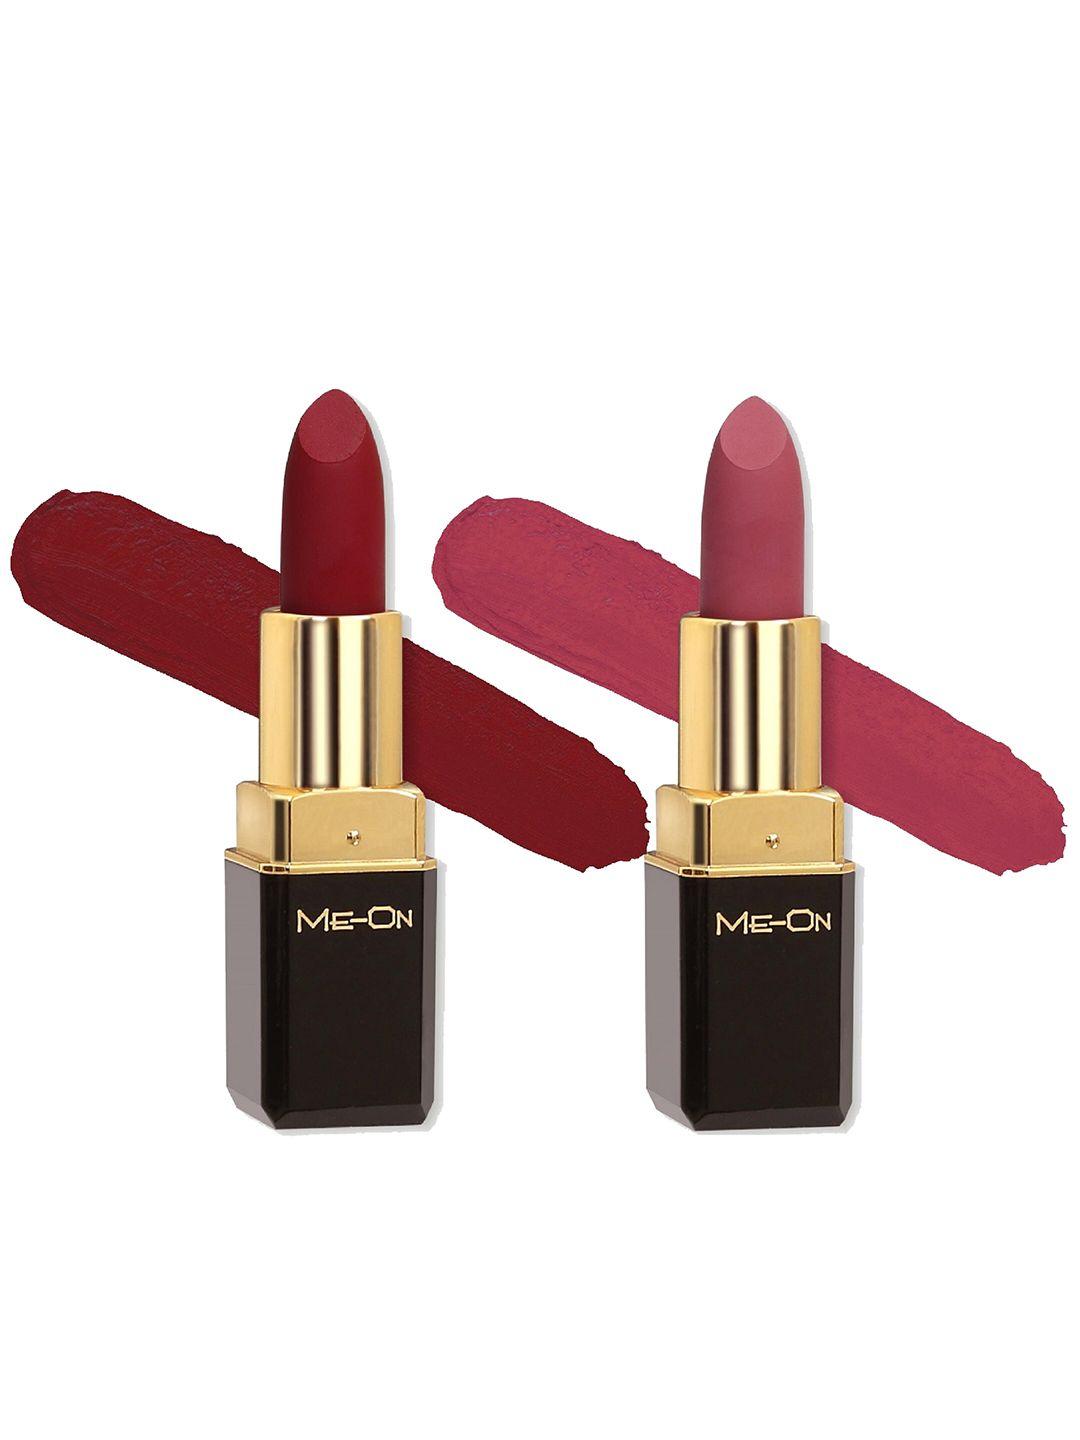 me-on color addict set of 2 long lasting hd matte lipstick -shade 03 & shade 22